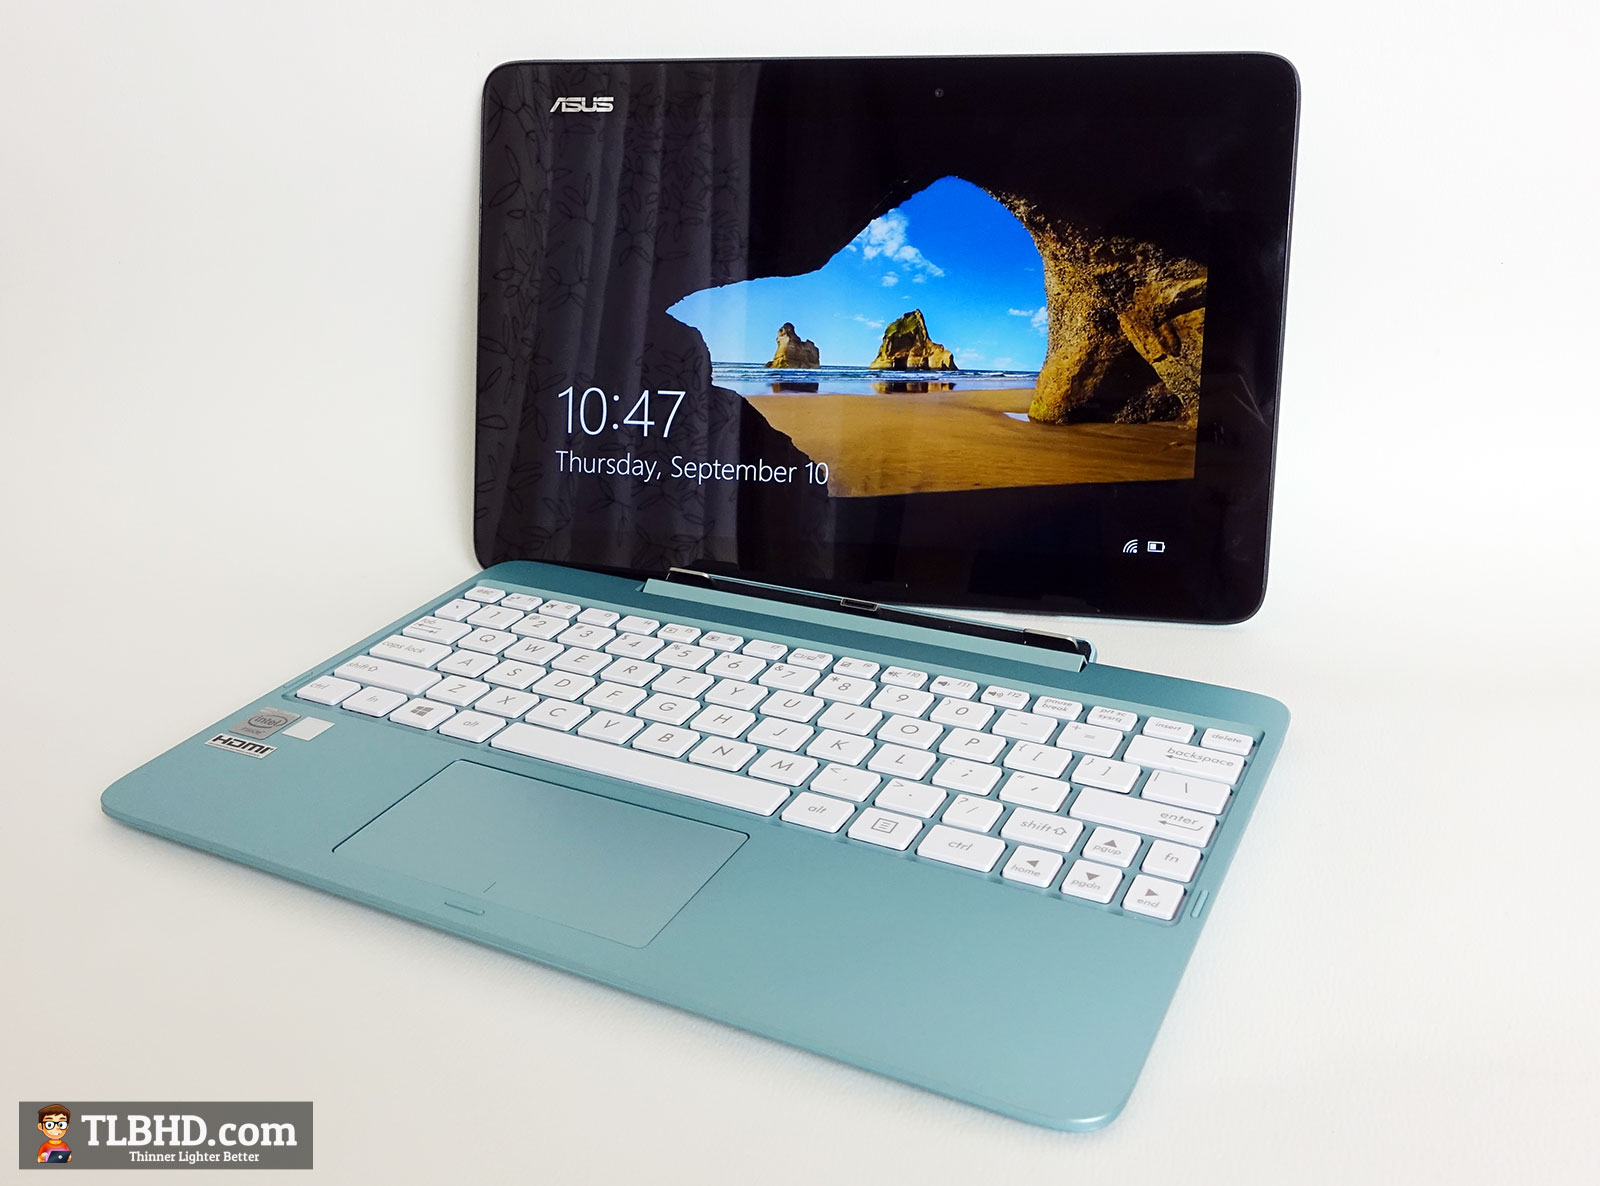 Asus Transformer Book T100HA review - the CherryTrail update 